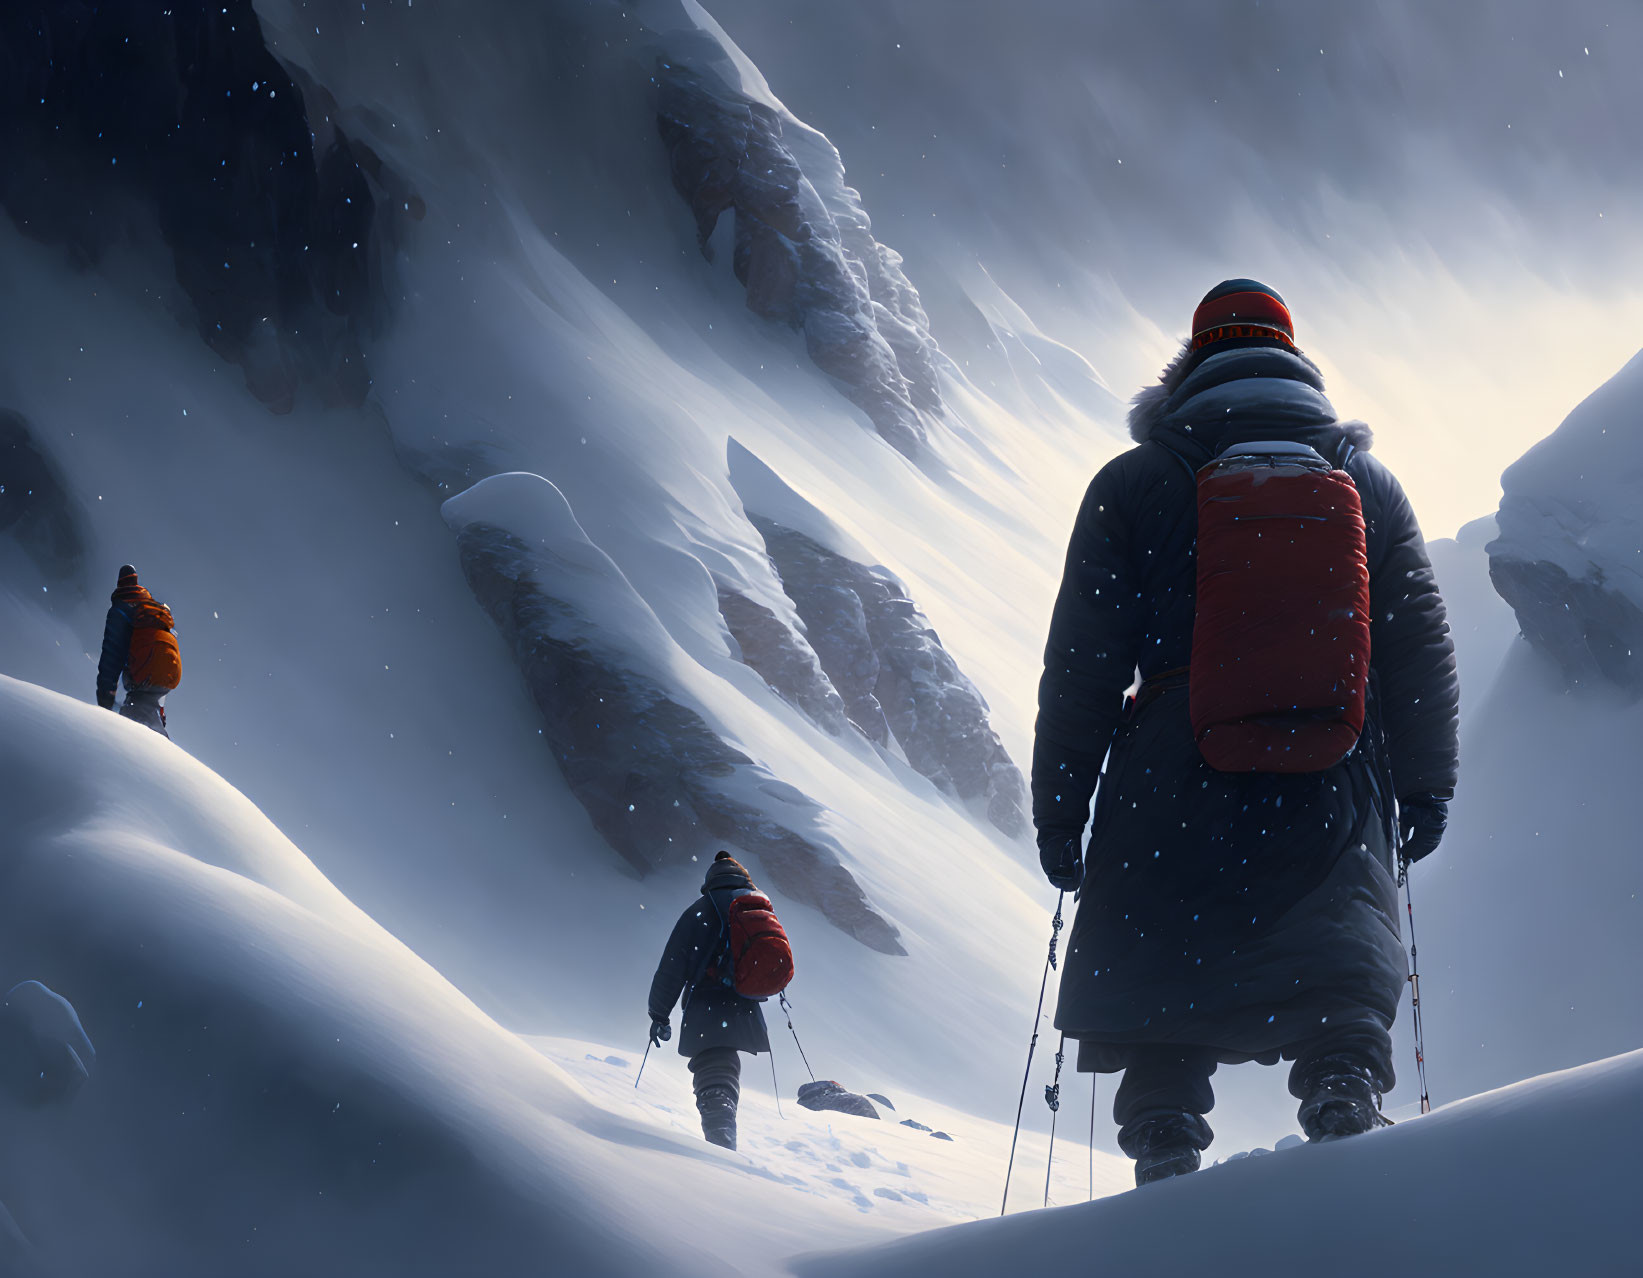 Three climbers in heavy winter gear navigating snowy mountain pass.